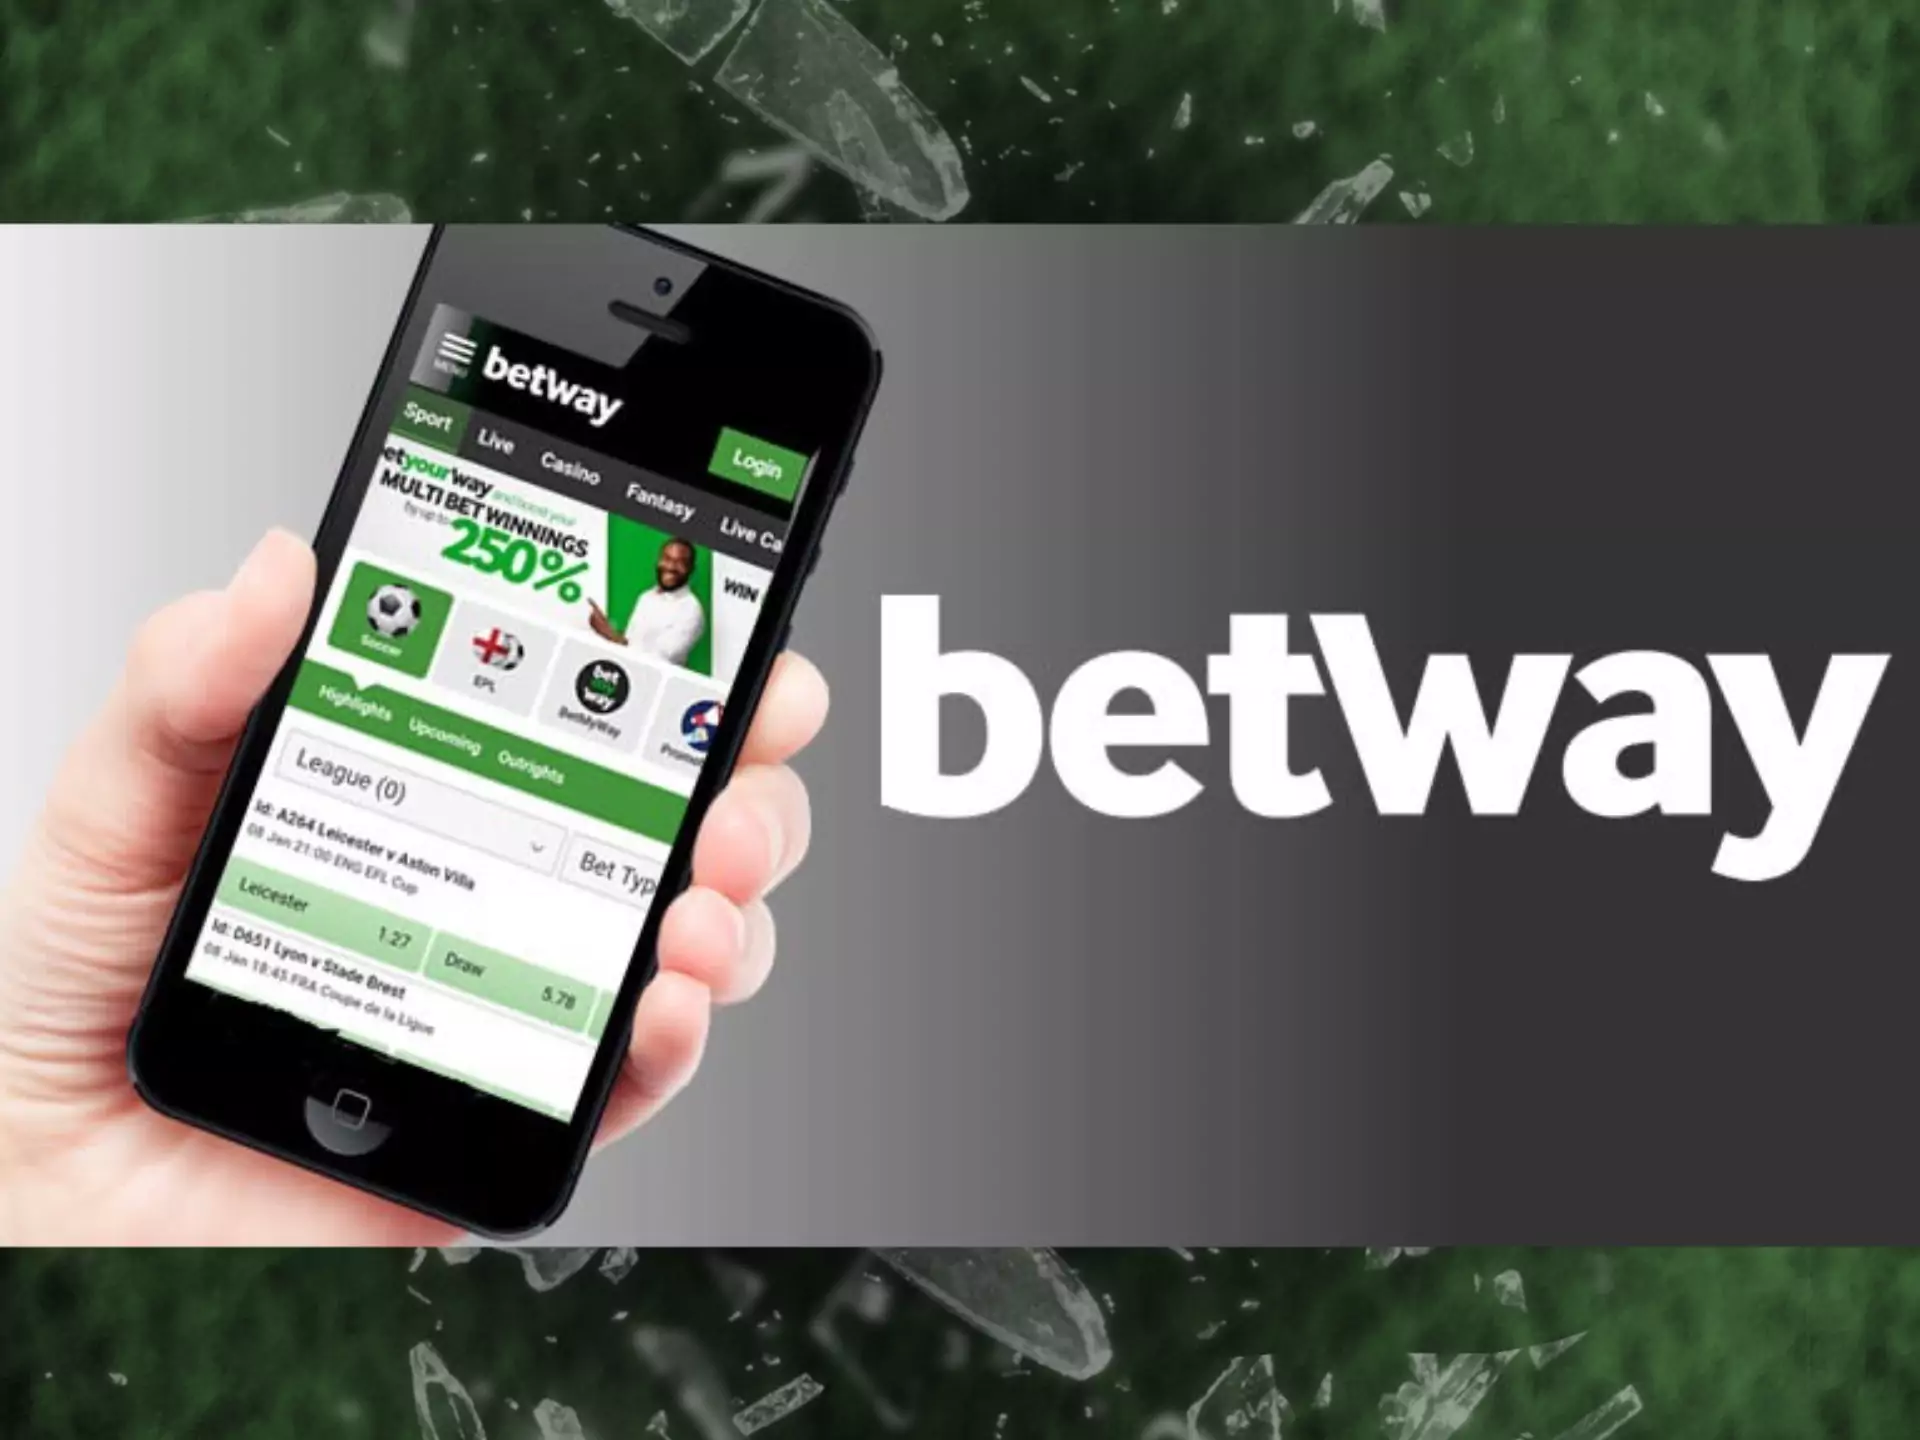 If you don't want to install an app, then Betway mobile version is for you.